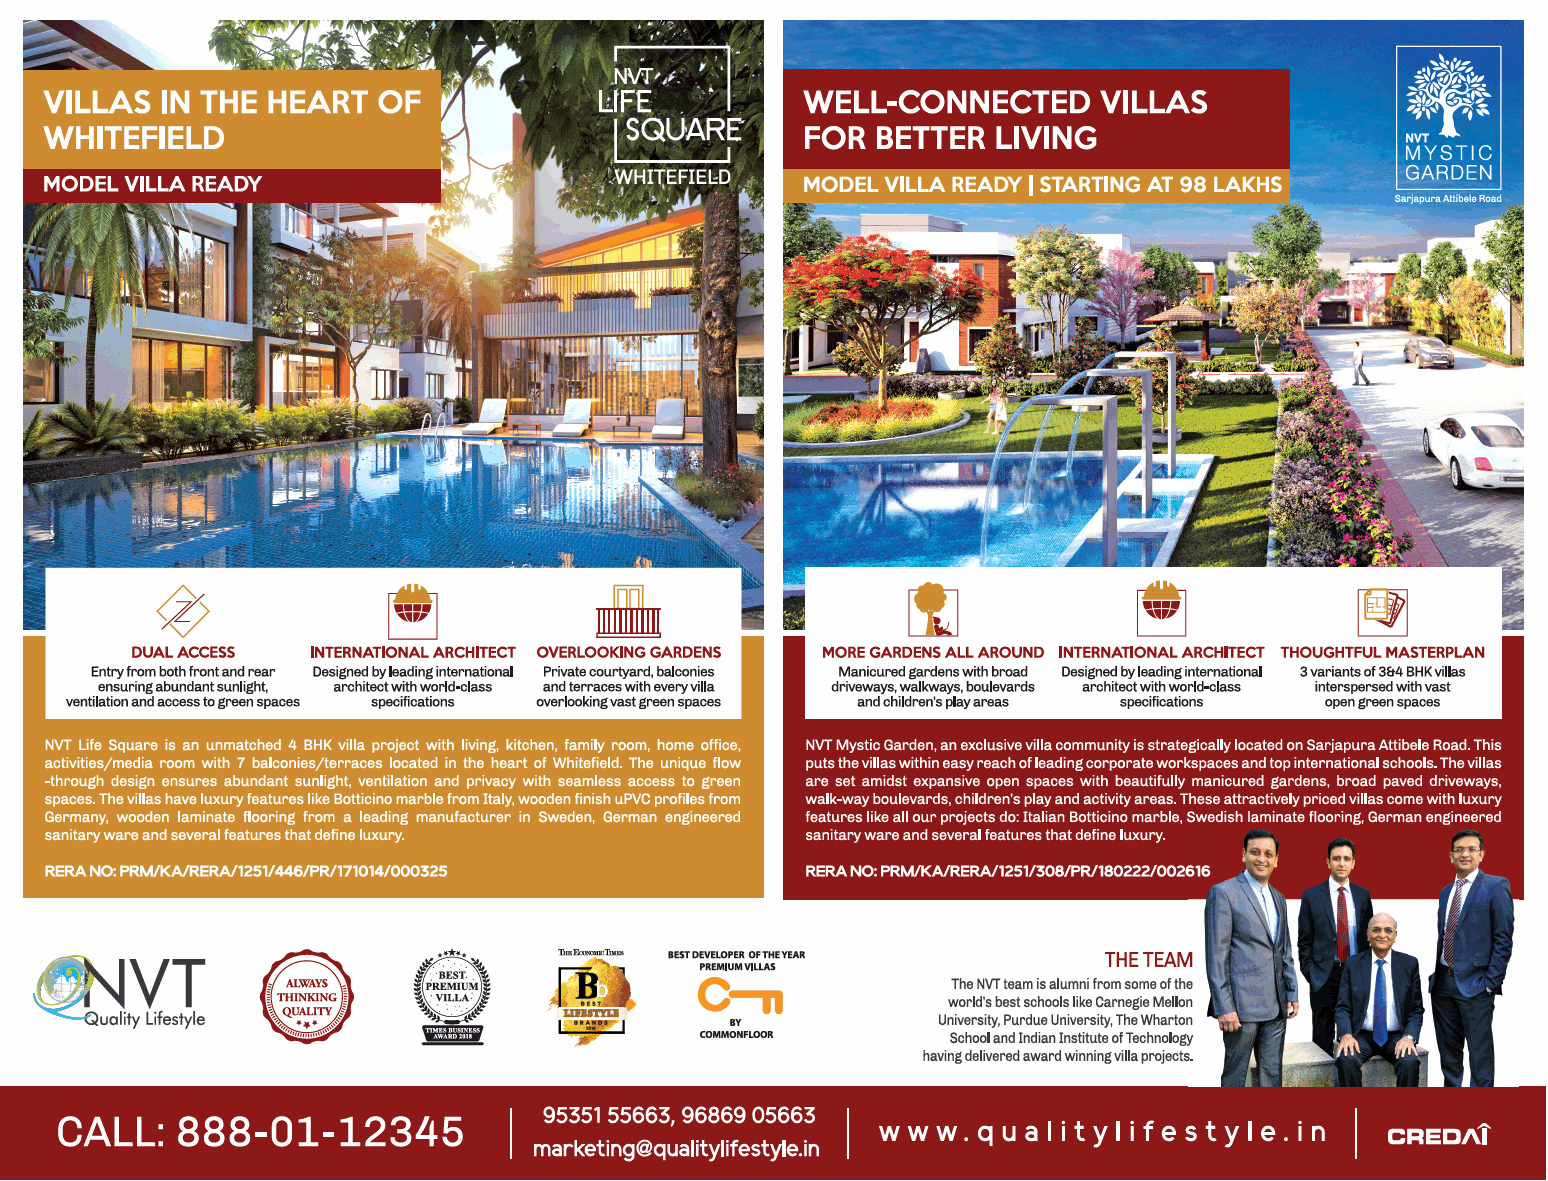 nvt-square-whitefield-villas-in-the-heart-of-whitefield-ad-times-of-india-bangalore-13-04-2019.png